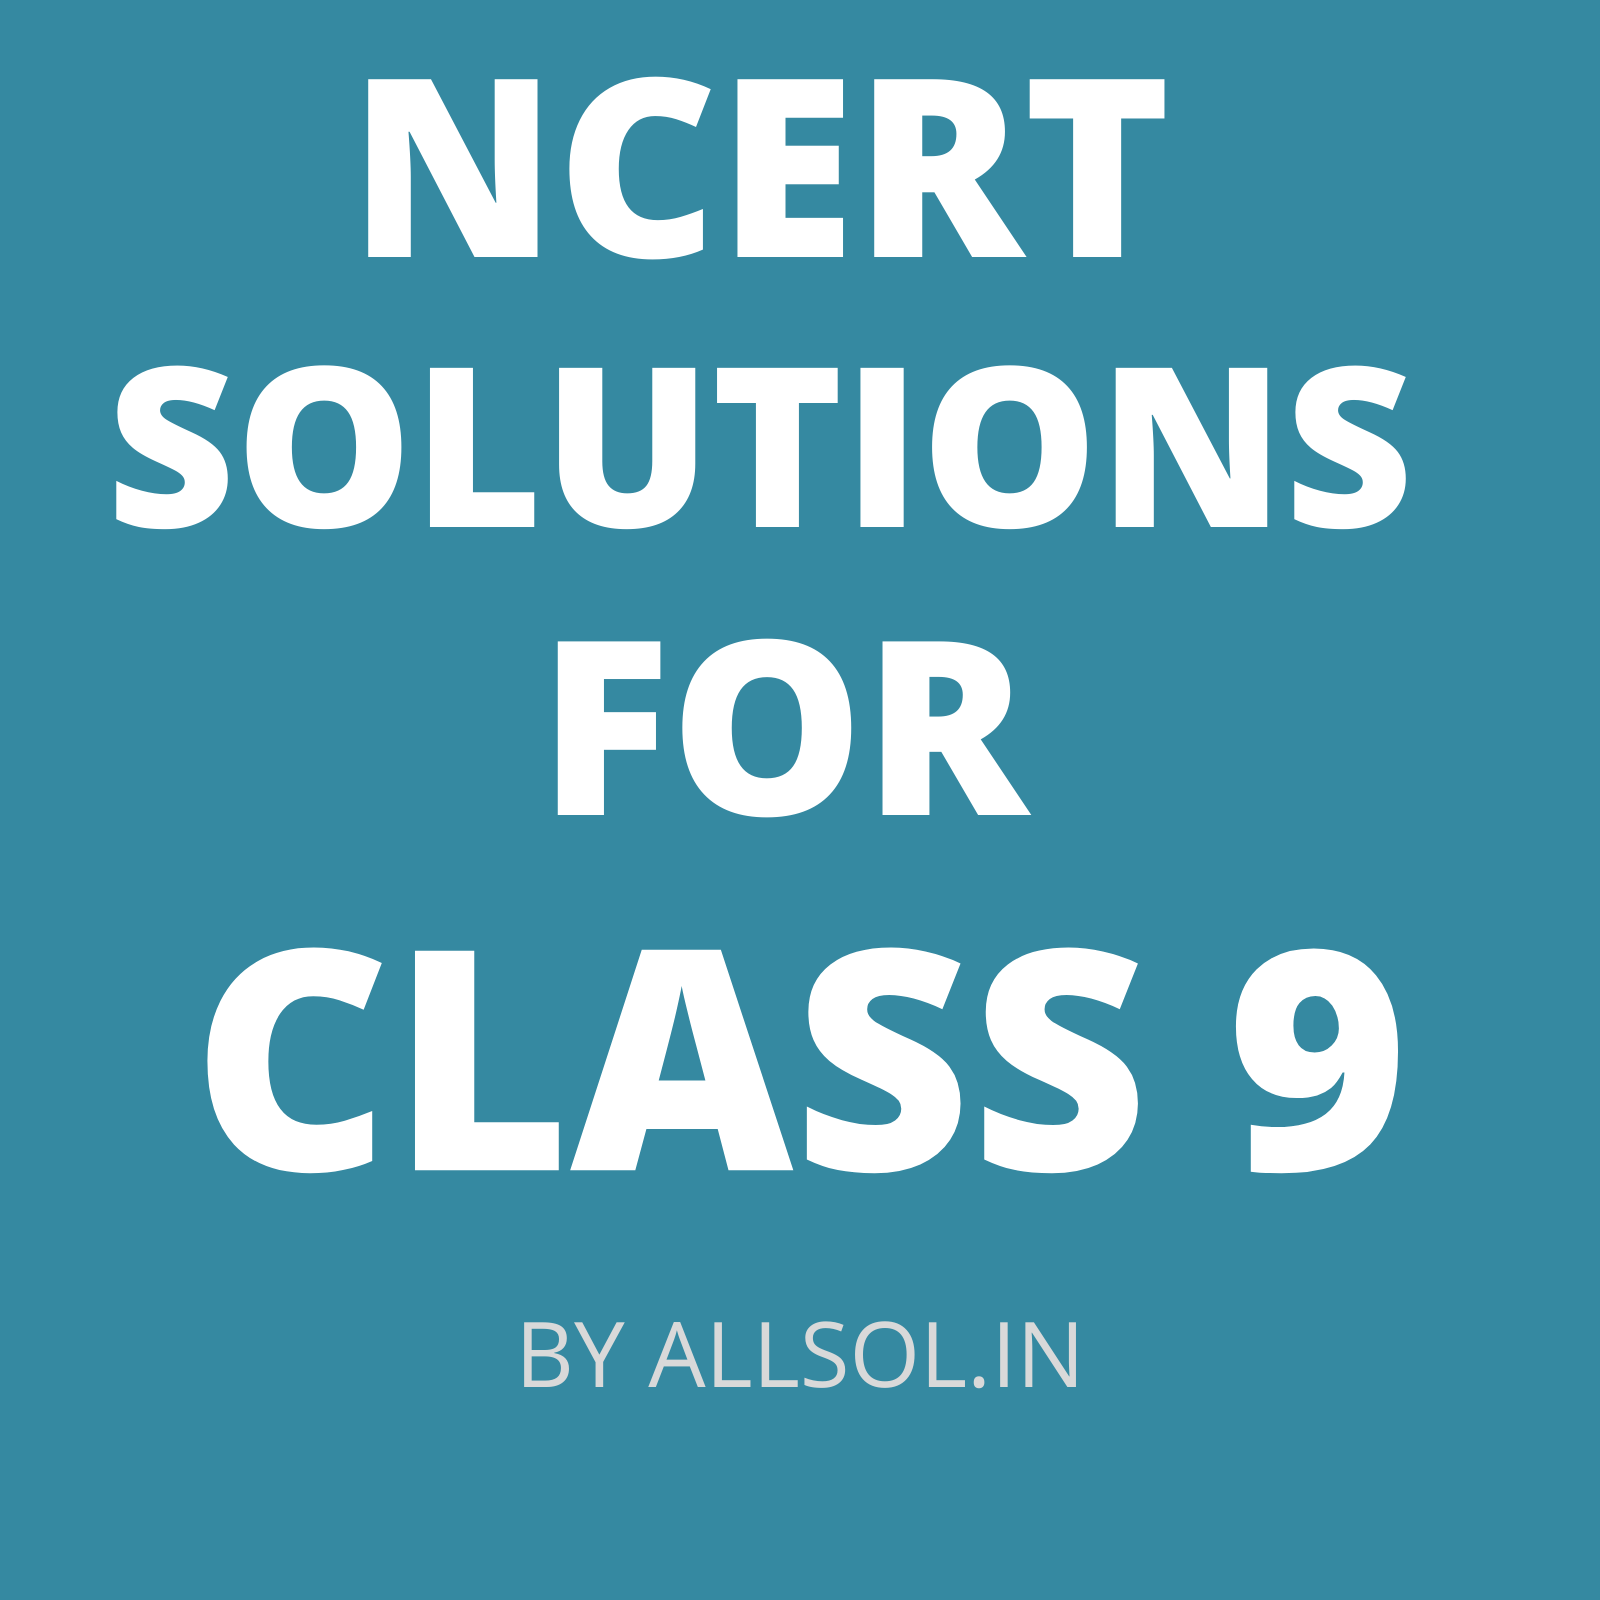 NCERT Solutions for Class 9 |